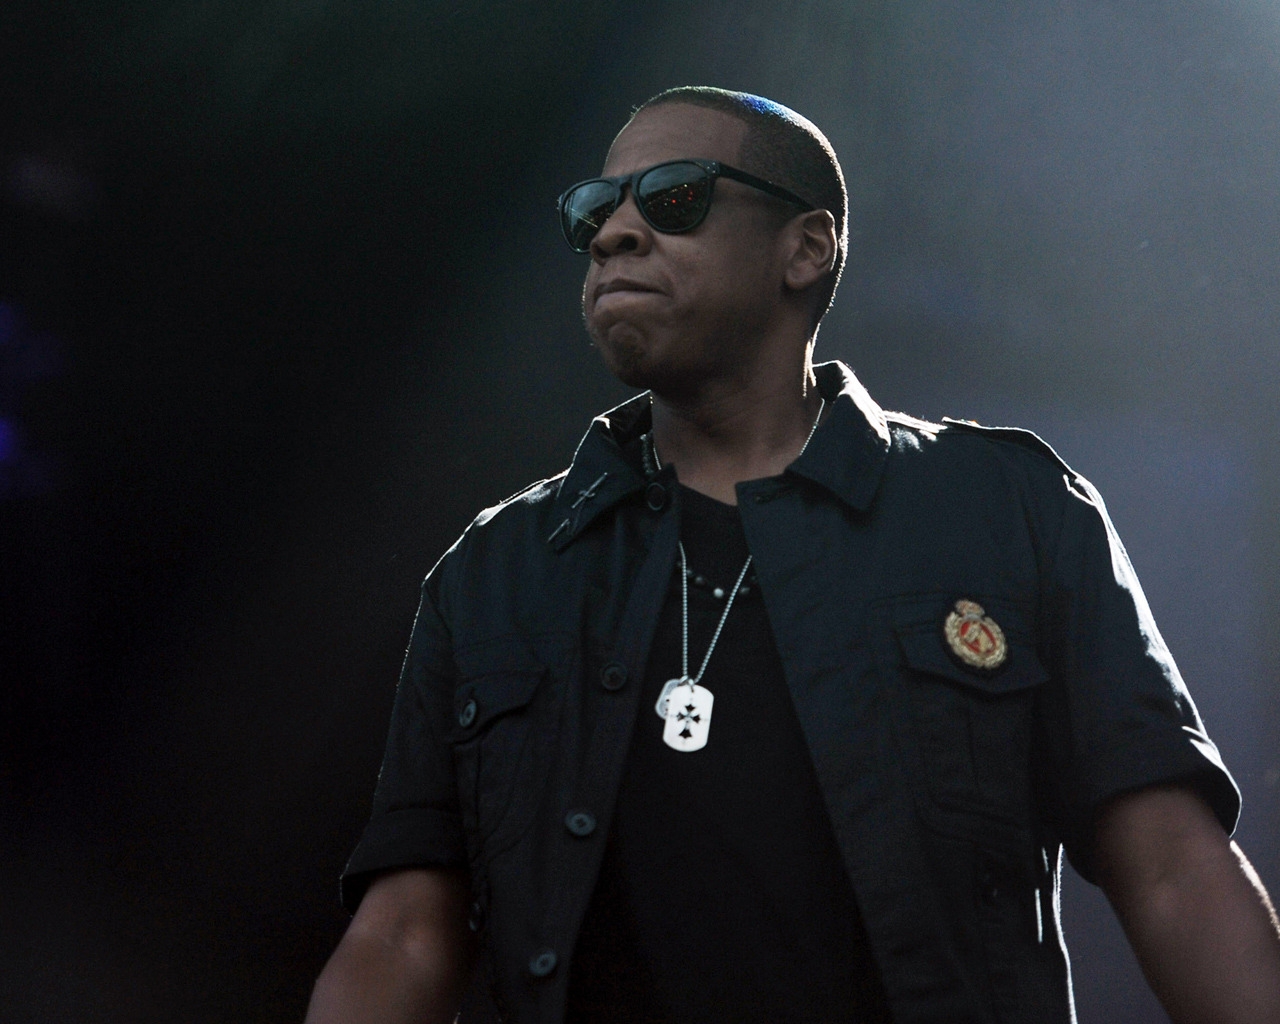 Cool Jay Z for 1280 x 1024 resolution